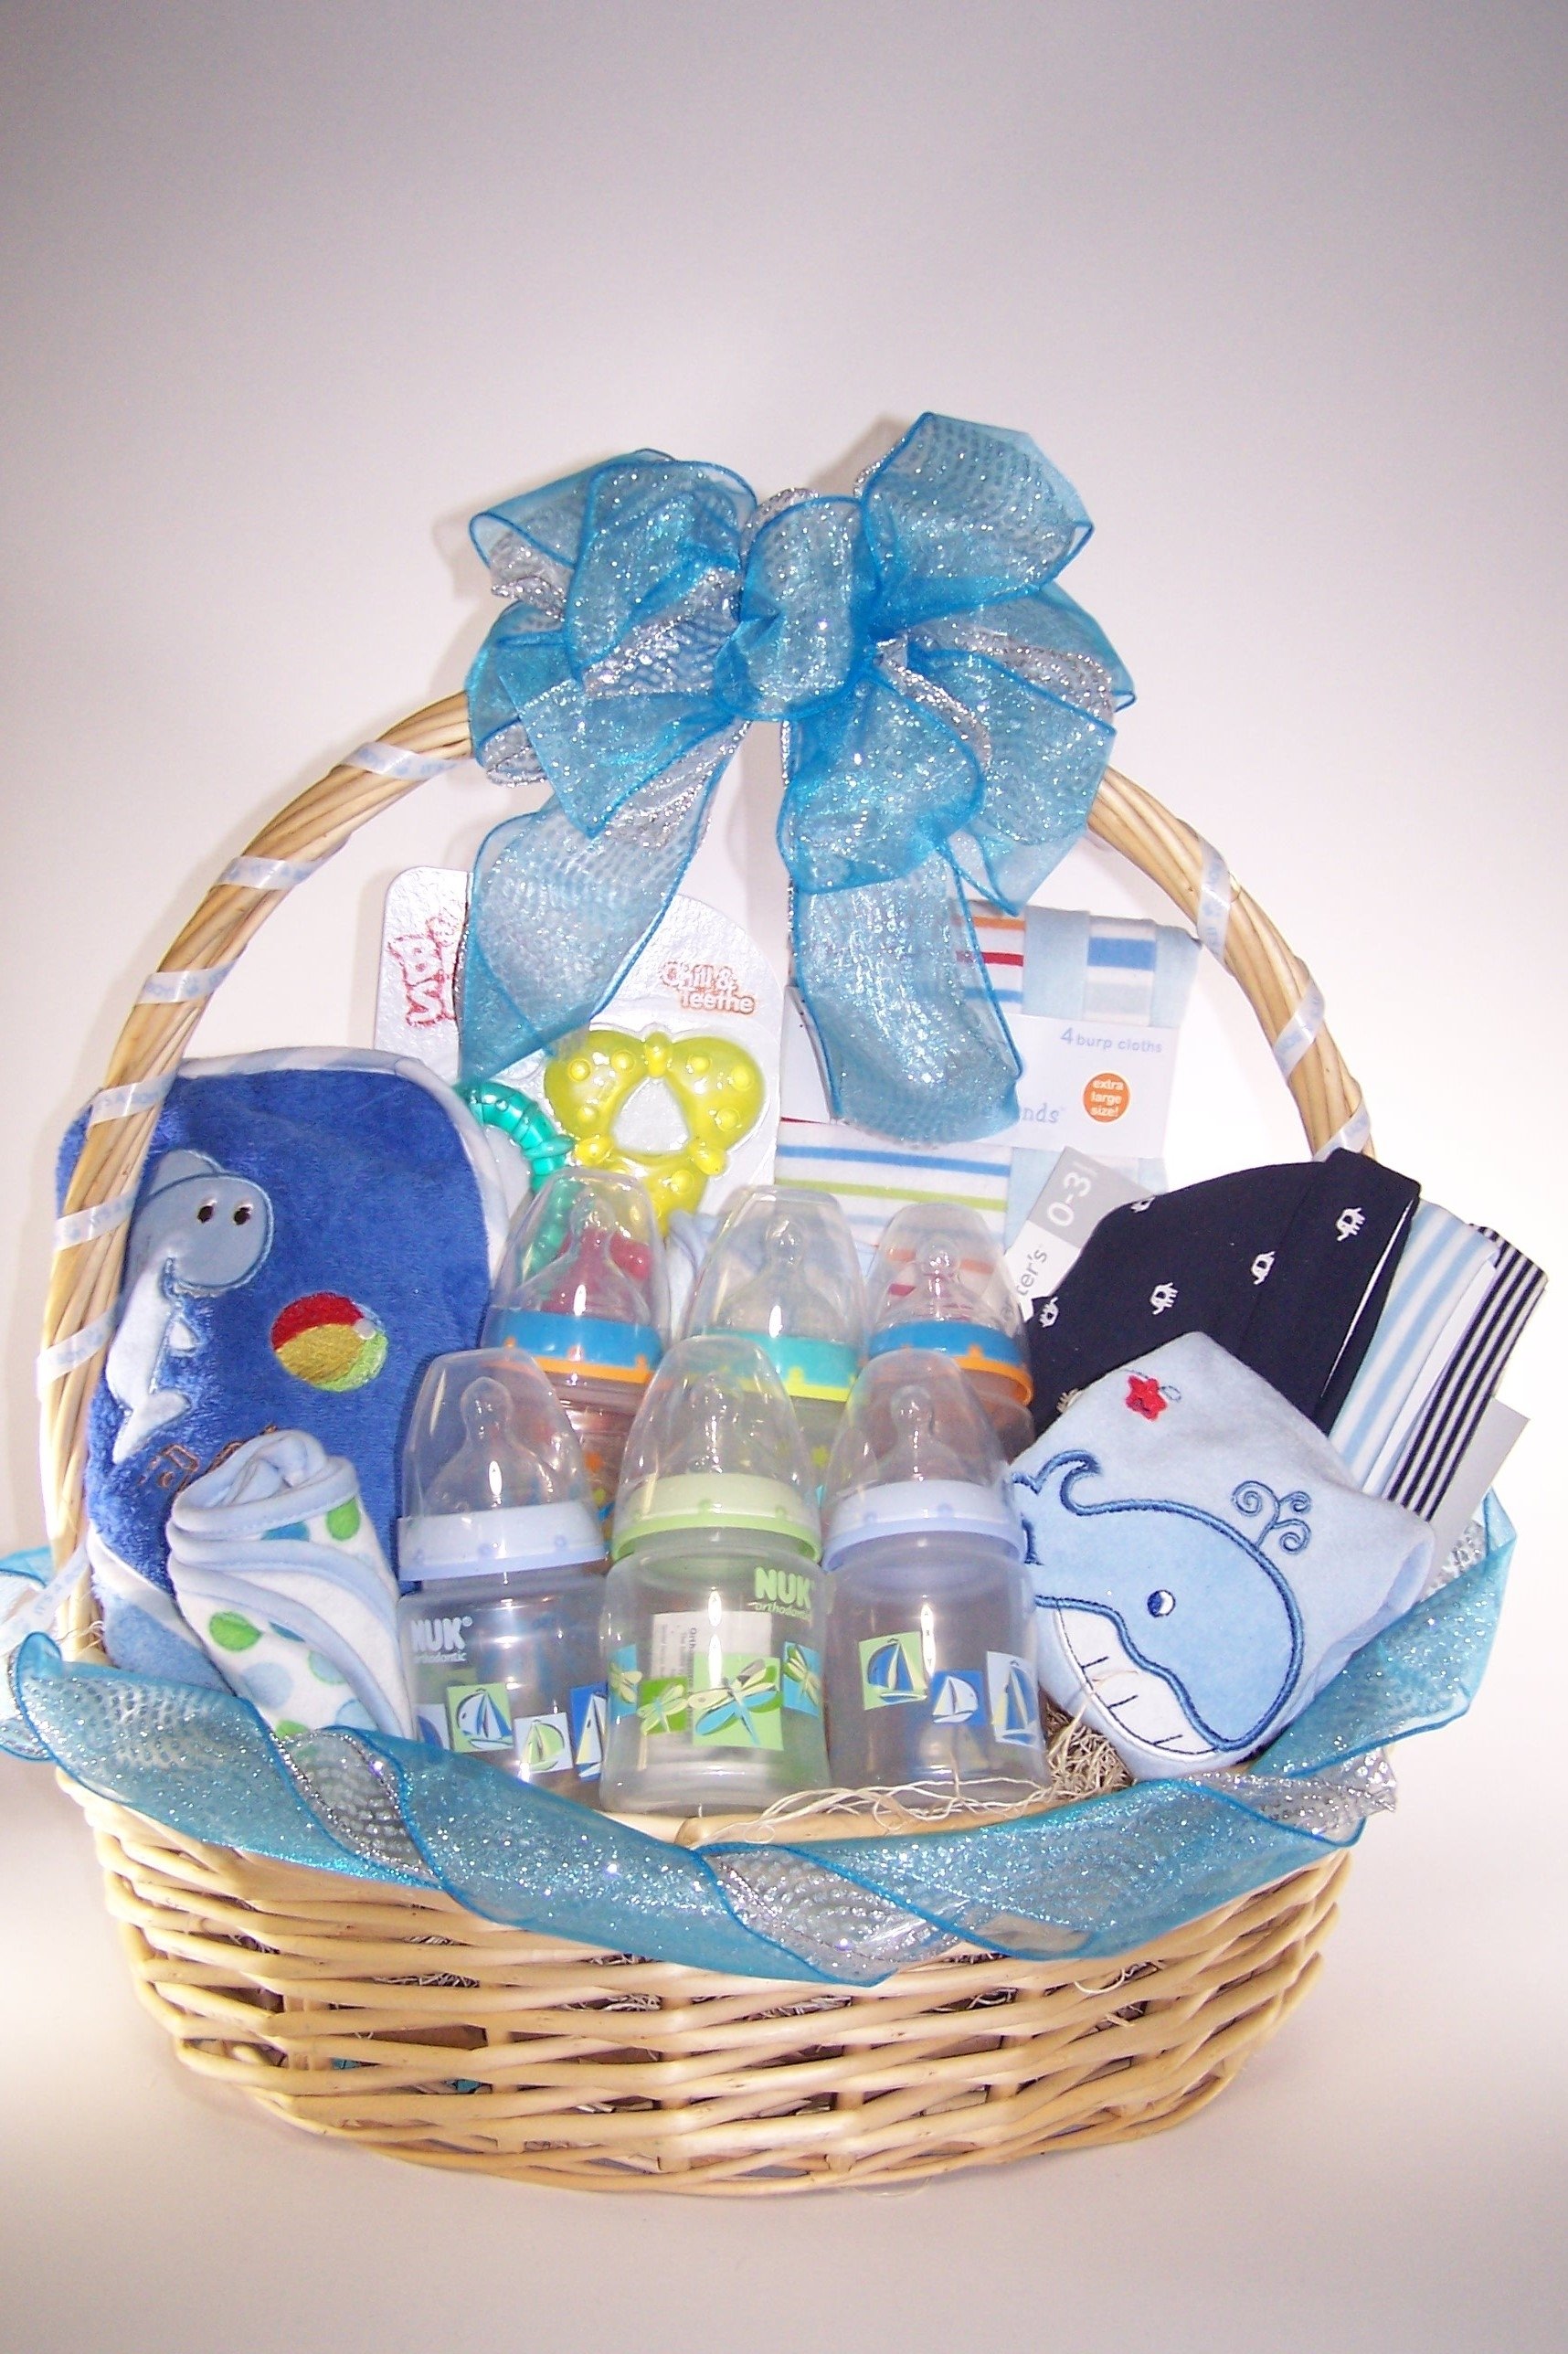 10 Pretty Unique Baby Boy Gifts Ideas cheap baby shower gifts fory unique uk or girl sensational for boy 2022